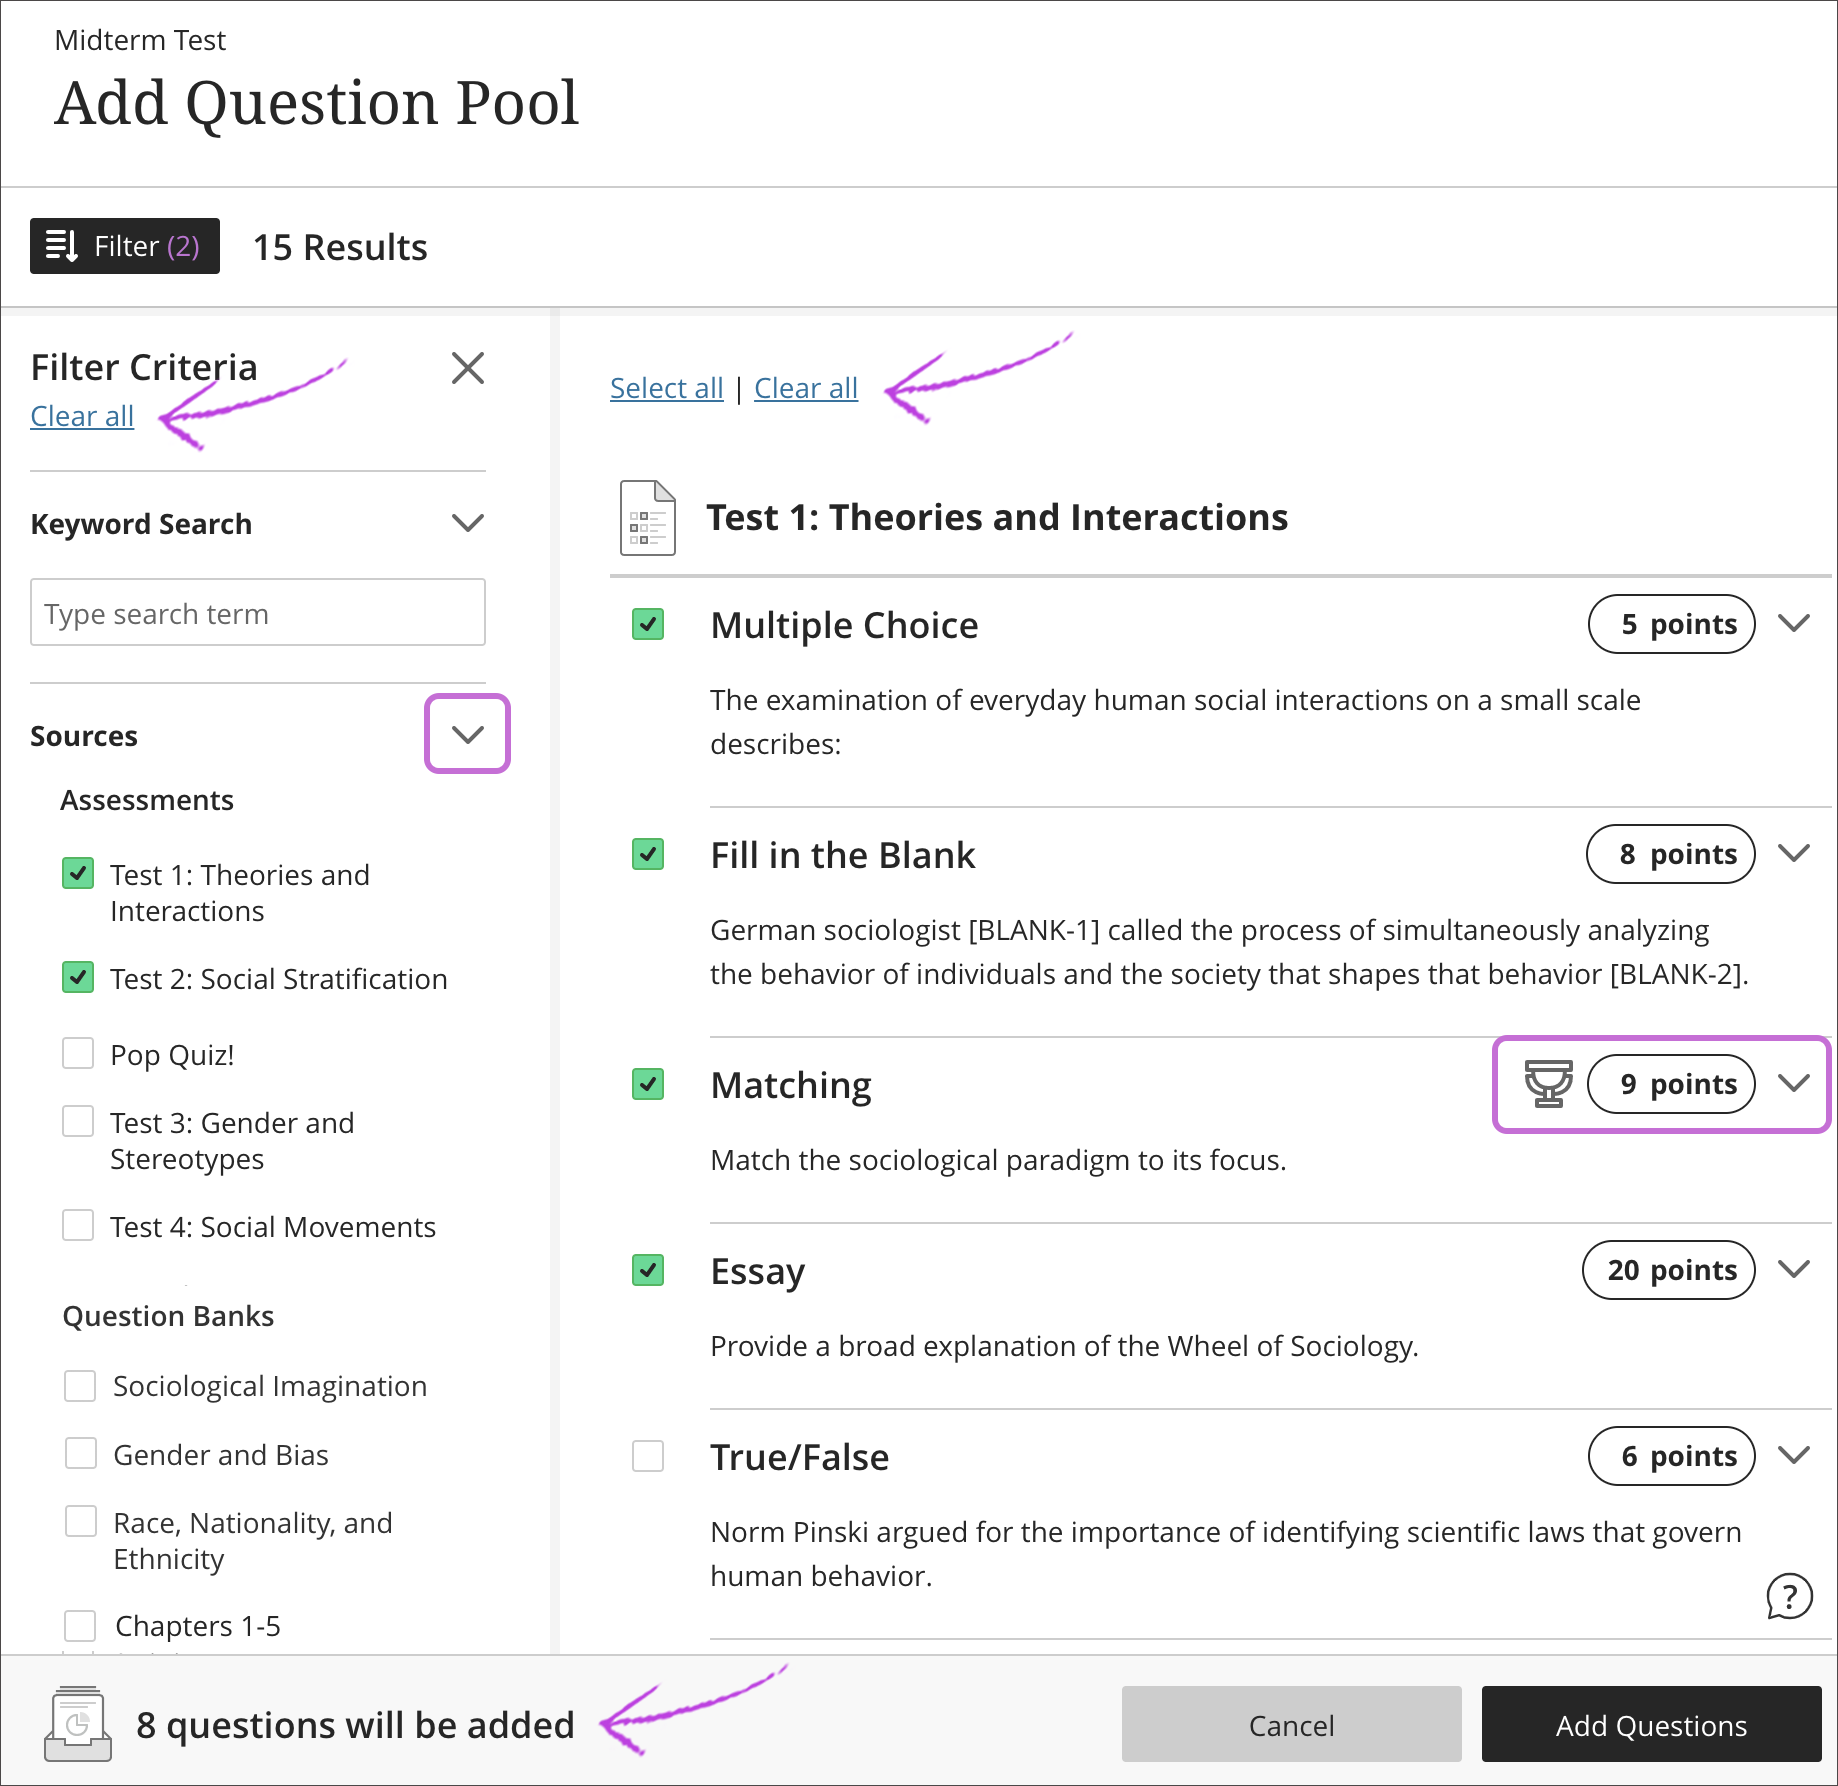 Add question pool panel is open with the filter criteria panel open. The clear all option is highlighted.